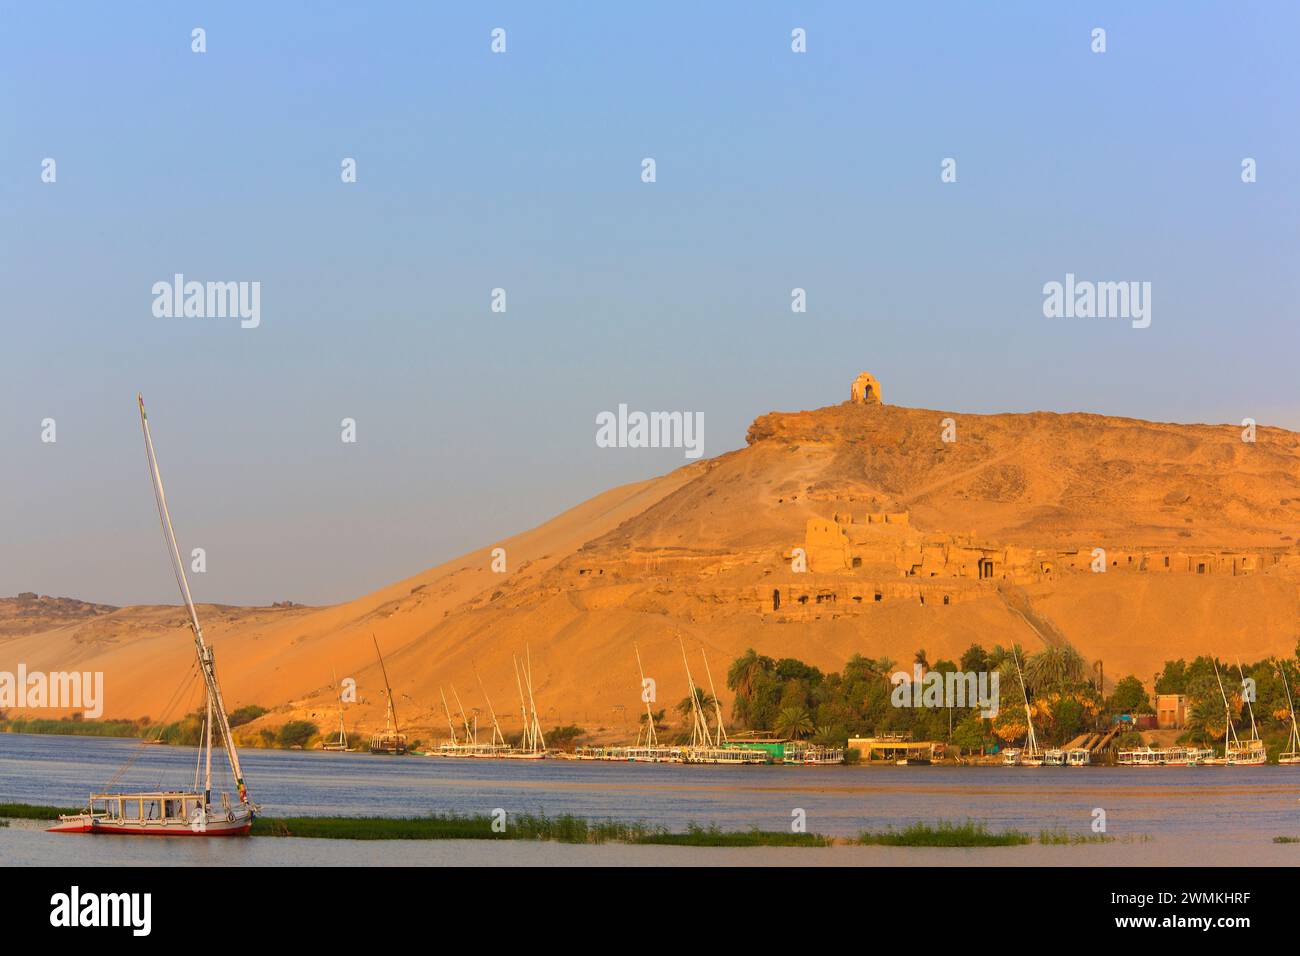 Tombs Of The Nobles in Aswan, Egypt; Aswan, Egypt Stock Photo